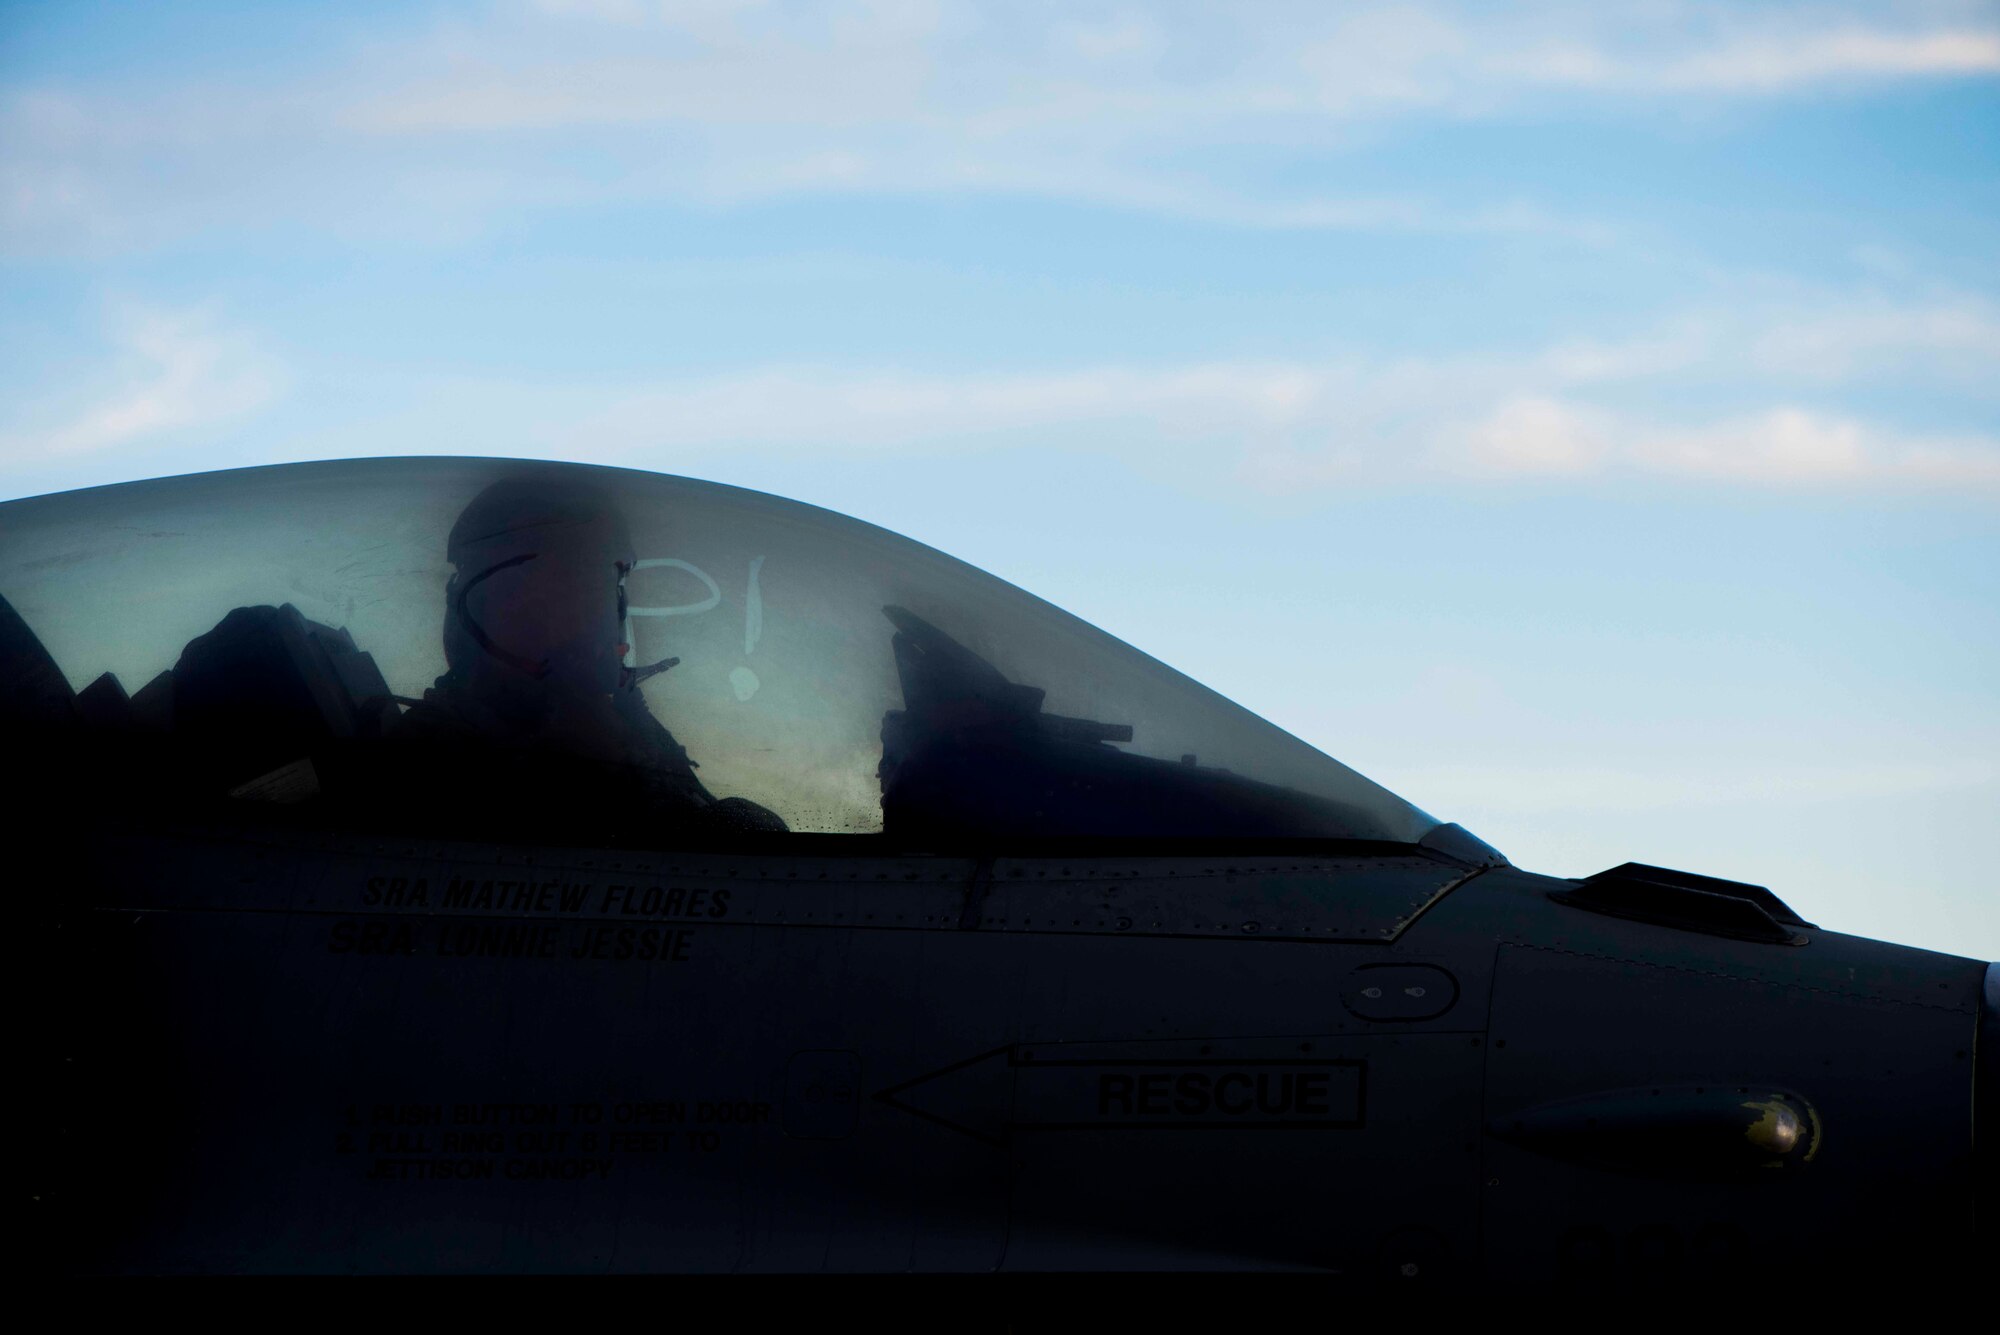 A pilot with the 13th Fighter Squadron writes the letters “CP” on the window of an F-16 Fighting Falcon before a flight during exercise RED FLAG Alaska 19-1 at Eielson Air Force Base, Alaska, Oct. 12, 2018. The letters “CP” stand for Cave Putorium, which is Latin for “fear the weasel.” (U.S. Air Force photo by Airman 1st Class Collette Brooks)